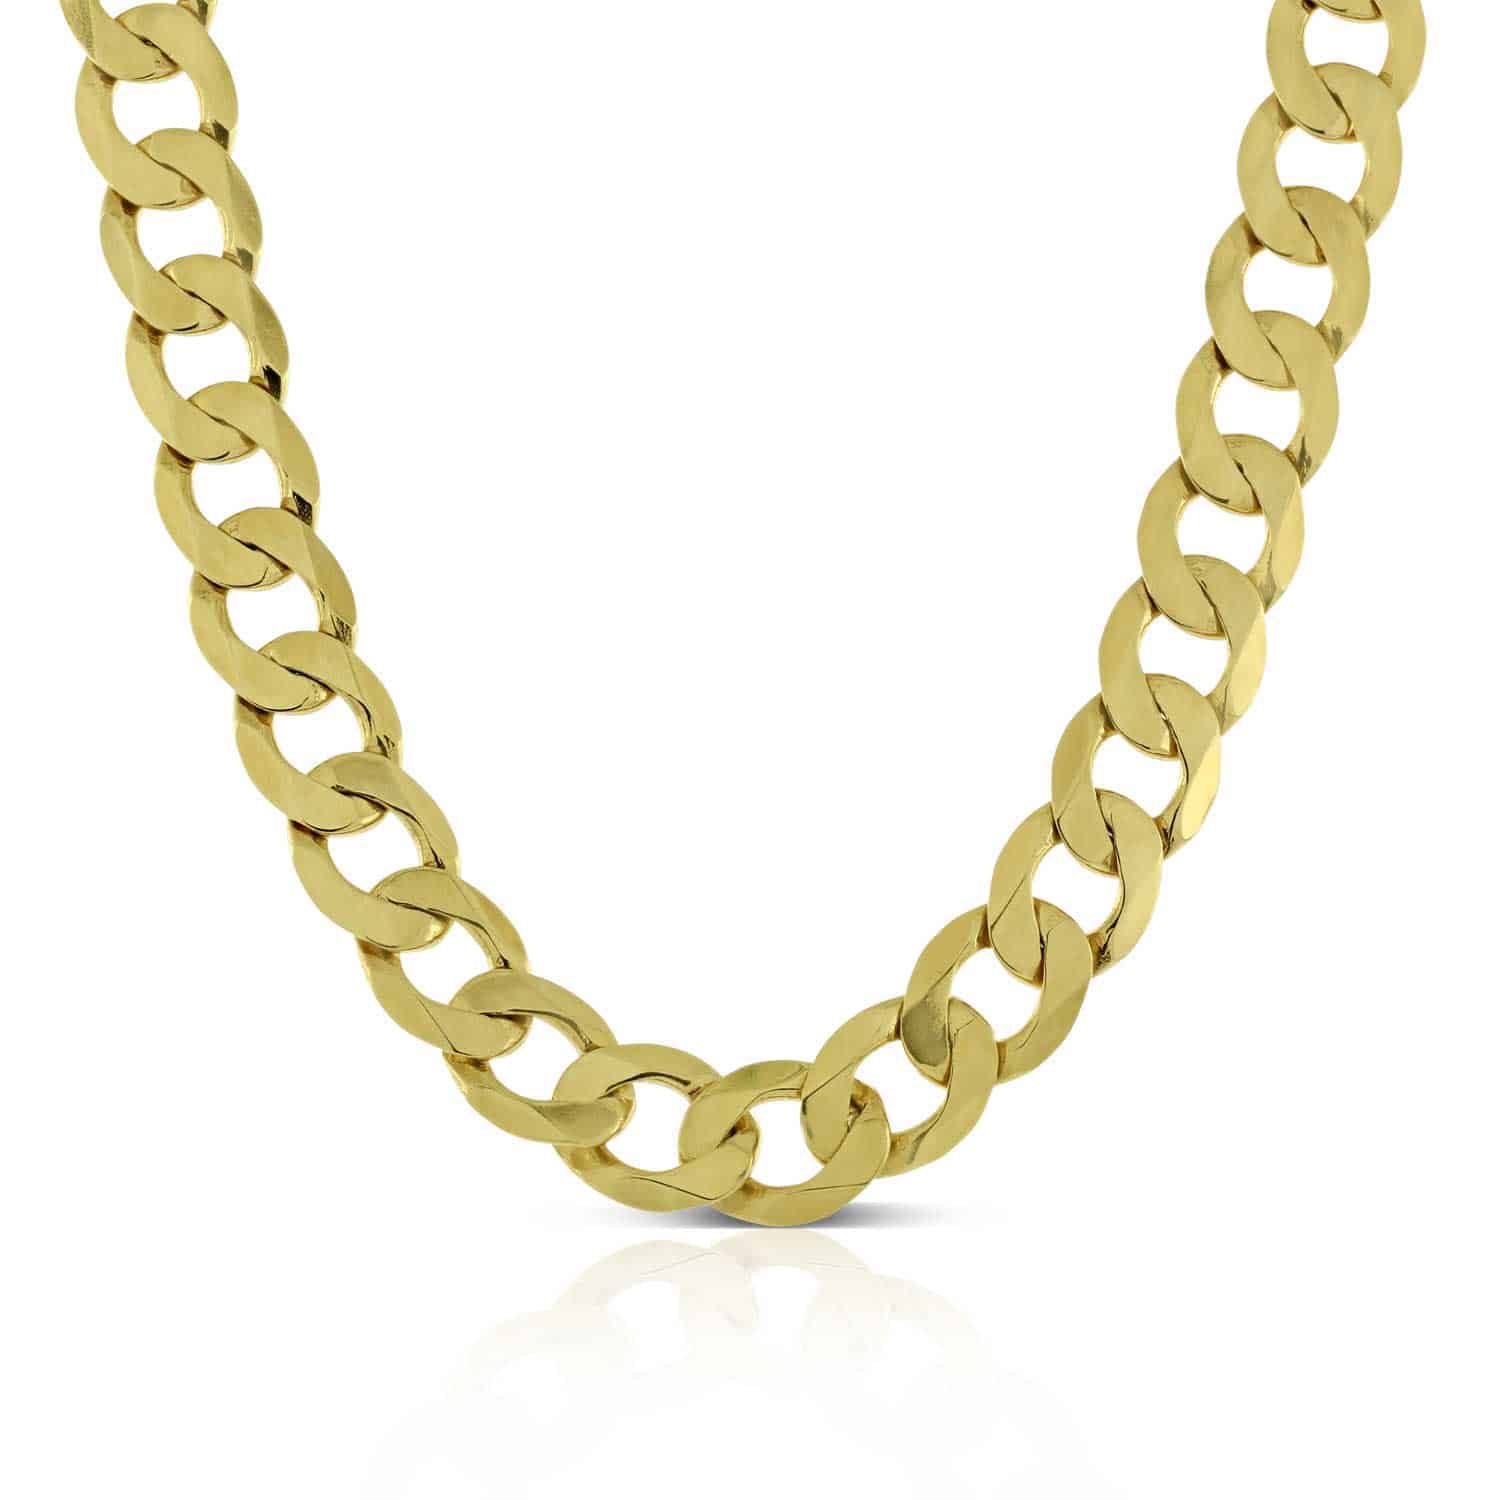 4 mm 14 KT. Yellow Gold Curb Link Chain (Chain Length: 18)